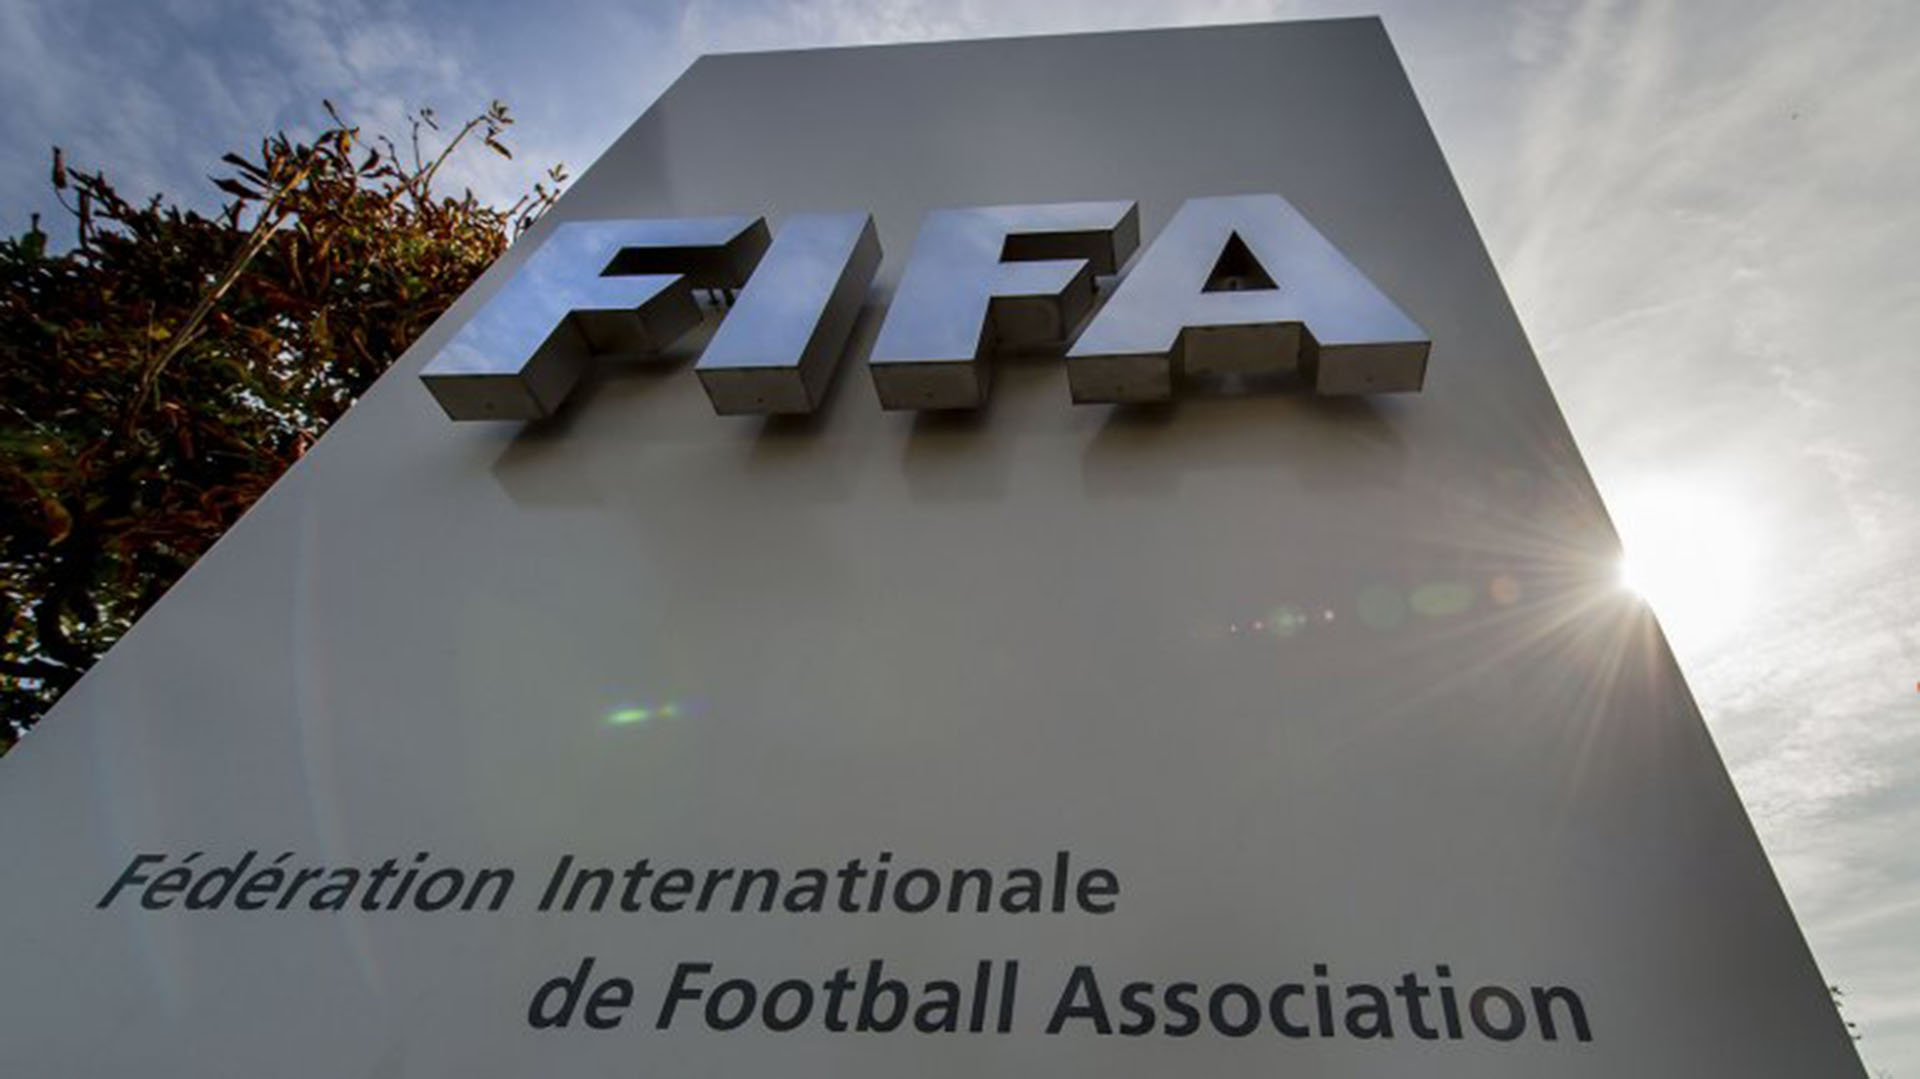 FIFA Gate: details of the biggest corruption scandal in football history involving Russia and Qatar